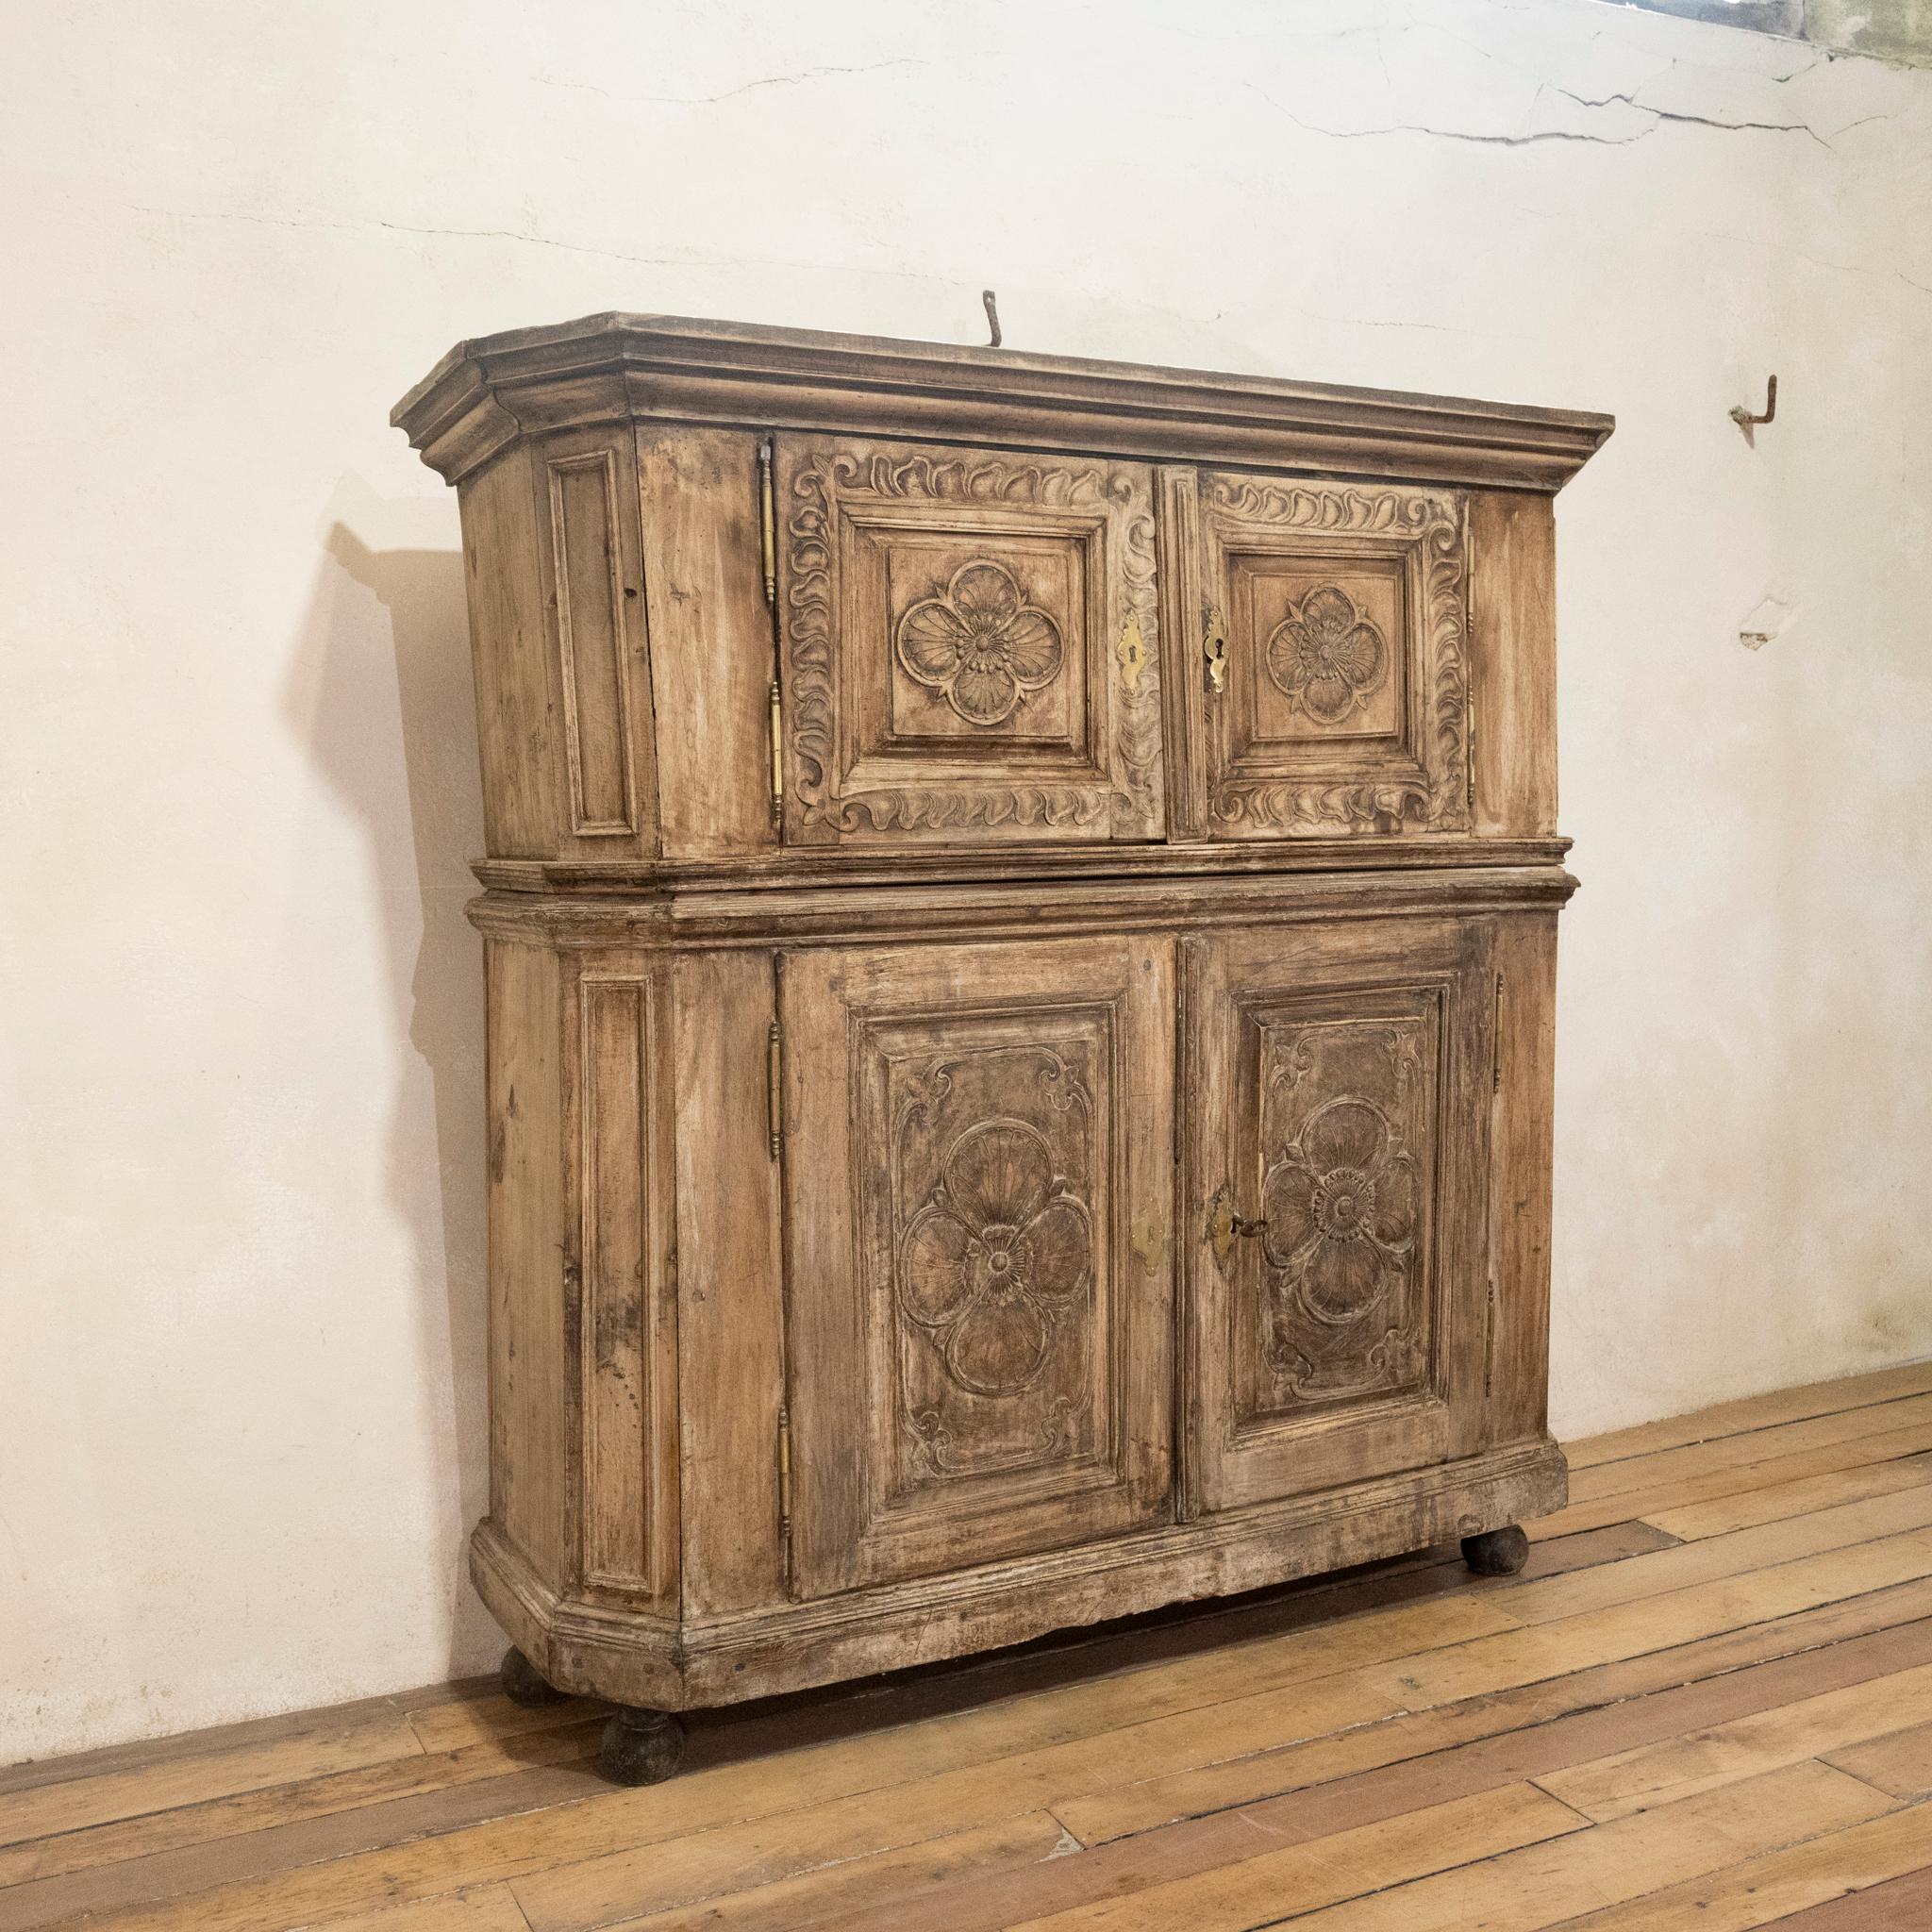 A 'square' mid 18th century and later French walnut armoire cupboard. Demonstrating a stepped cornice above a pair of raised and fielded panel doors carved with quatrefoils and flowerhead bosses. The slightly projecting base with a further pair of